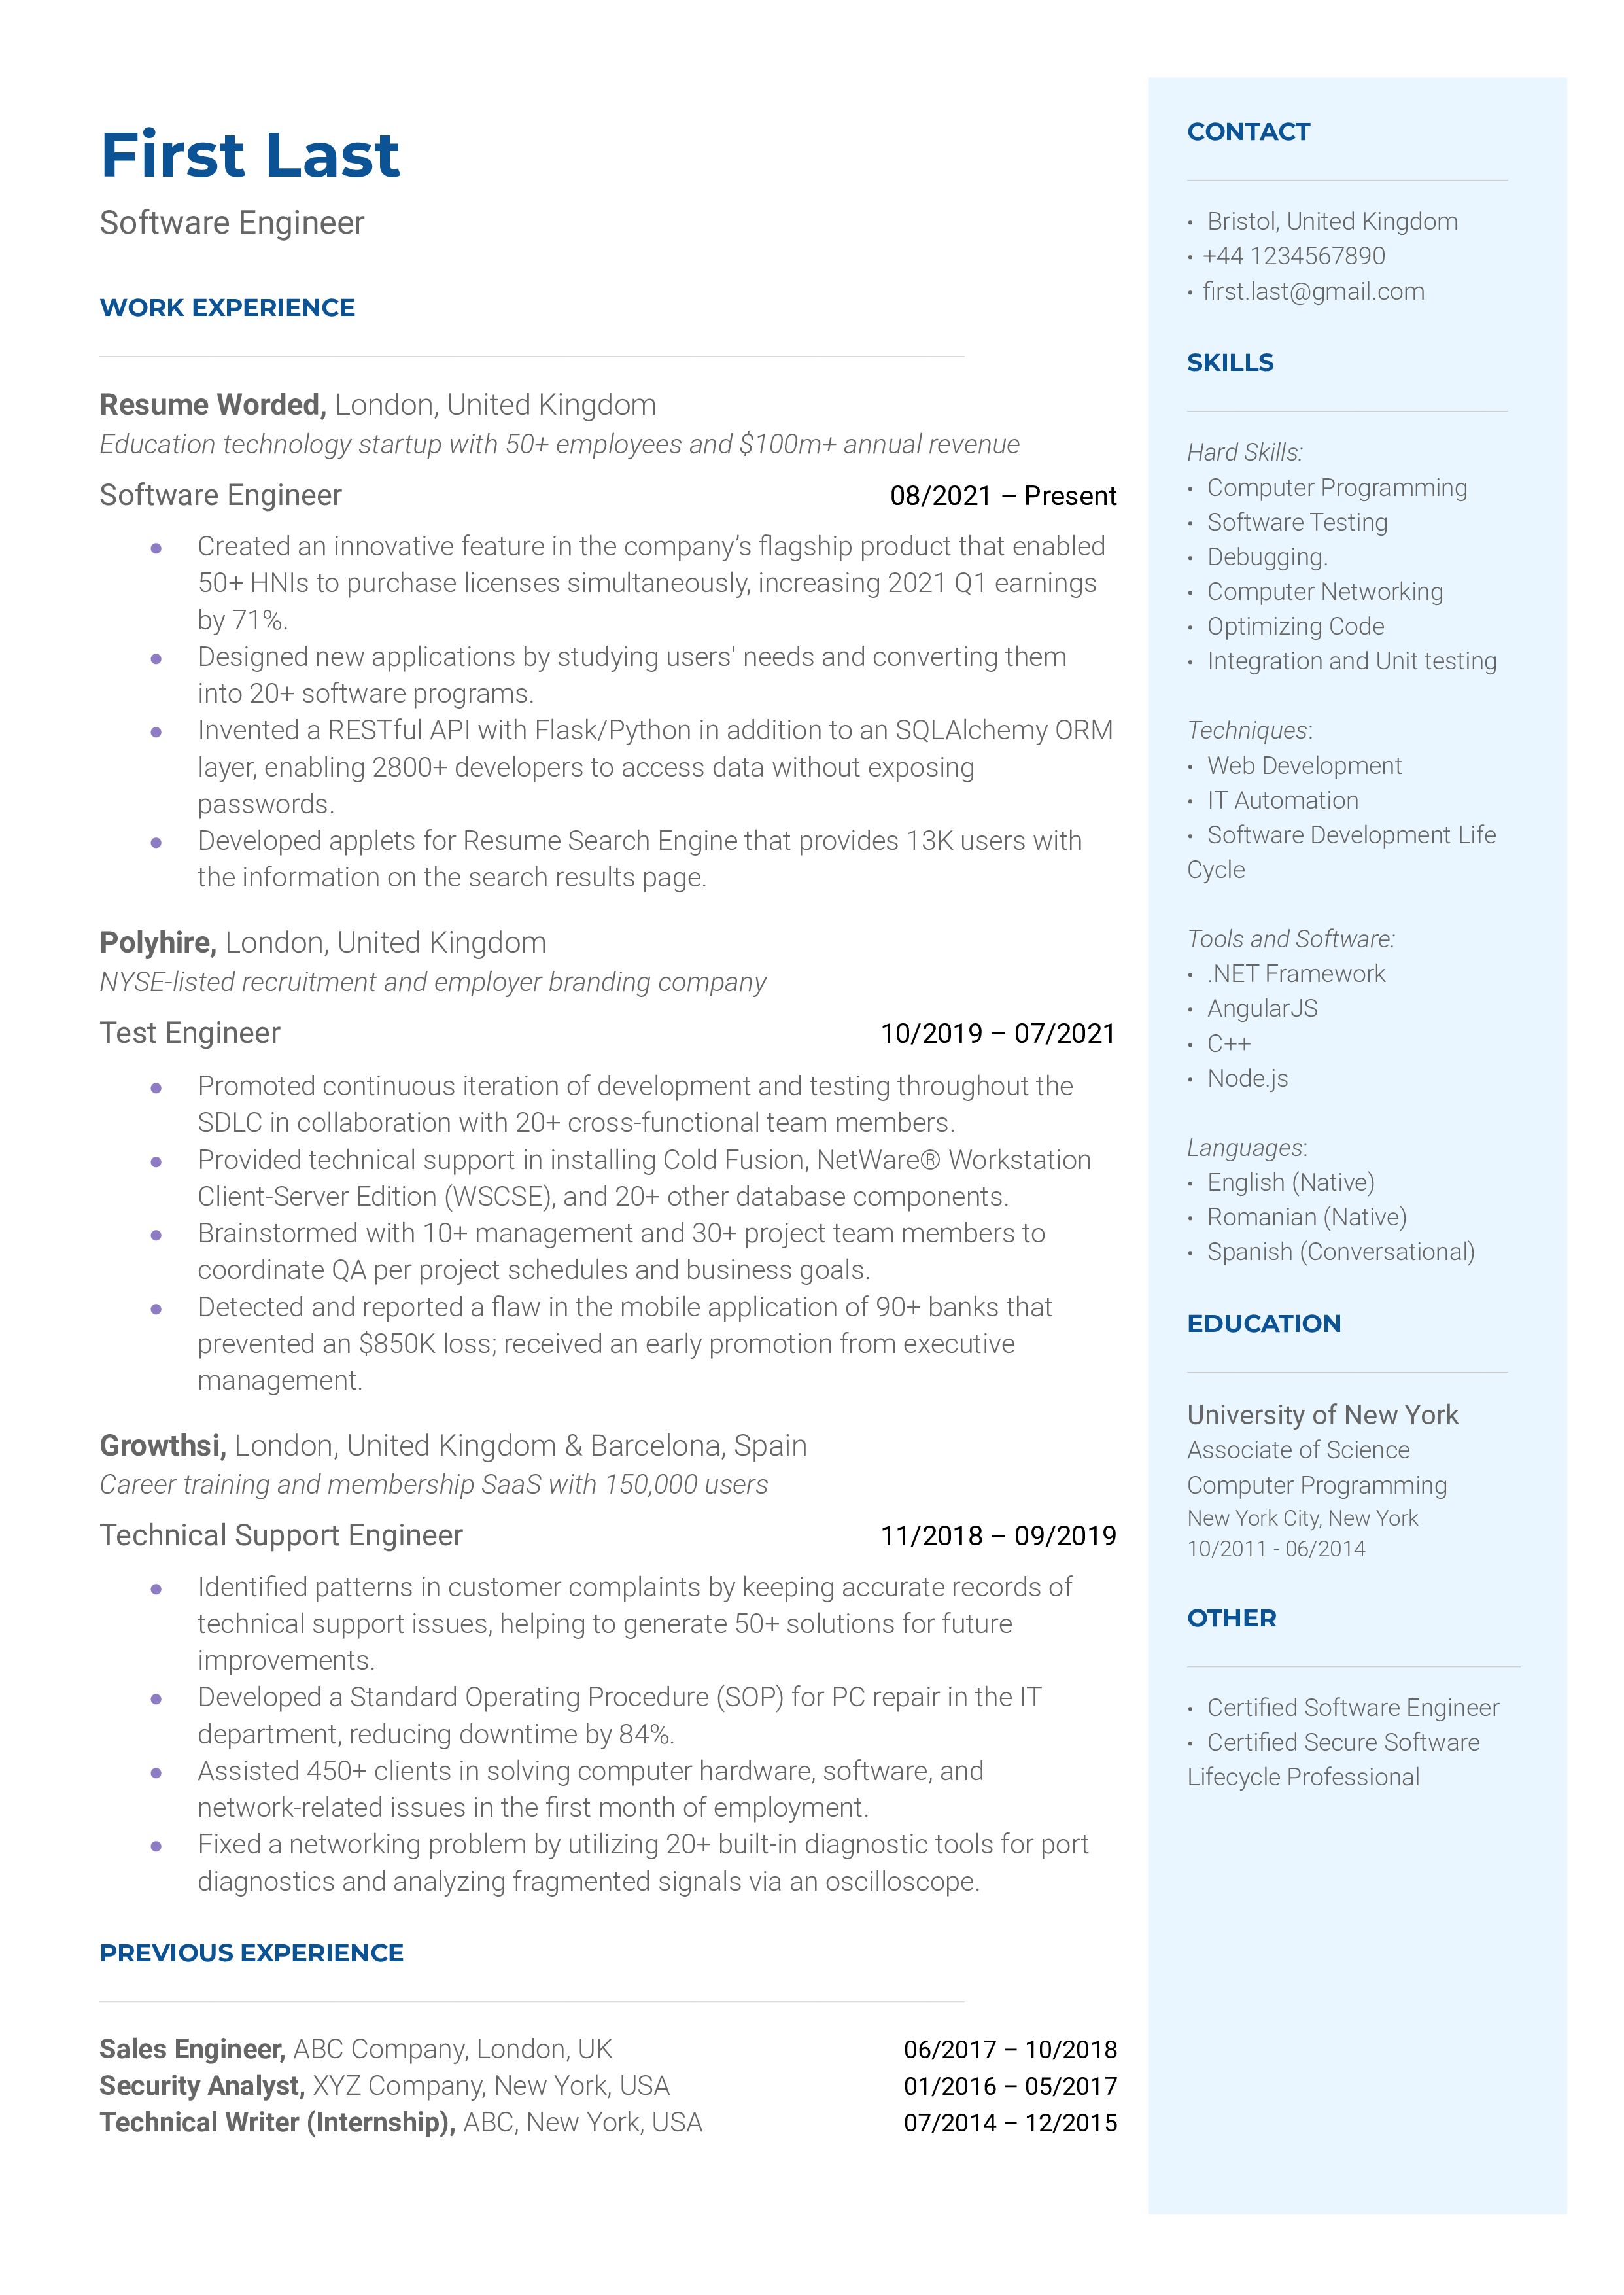 A resume for a software engineer with a degree in electrical engineering and experience as a front-end developer.